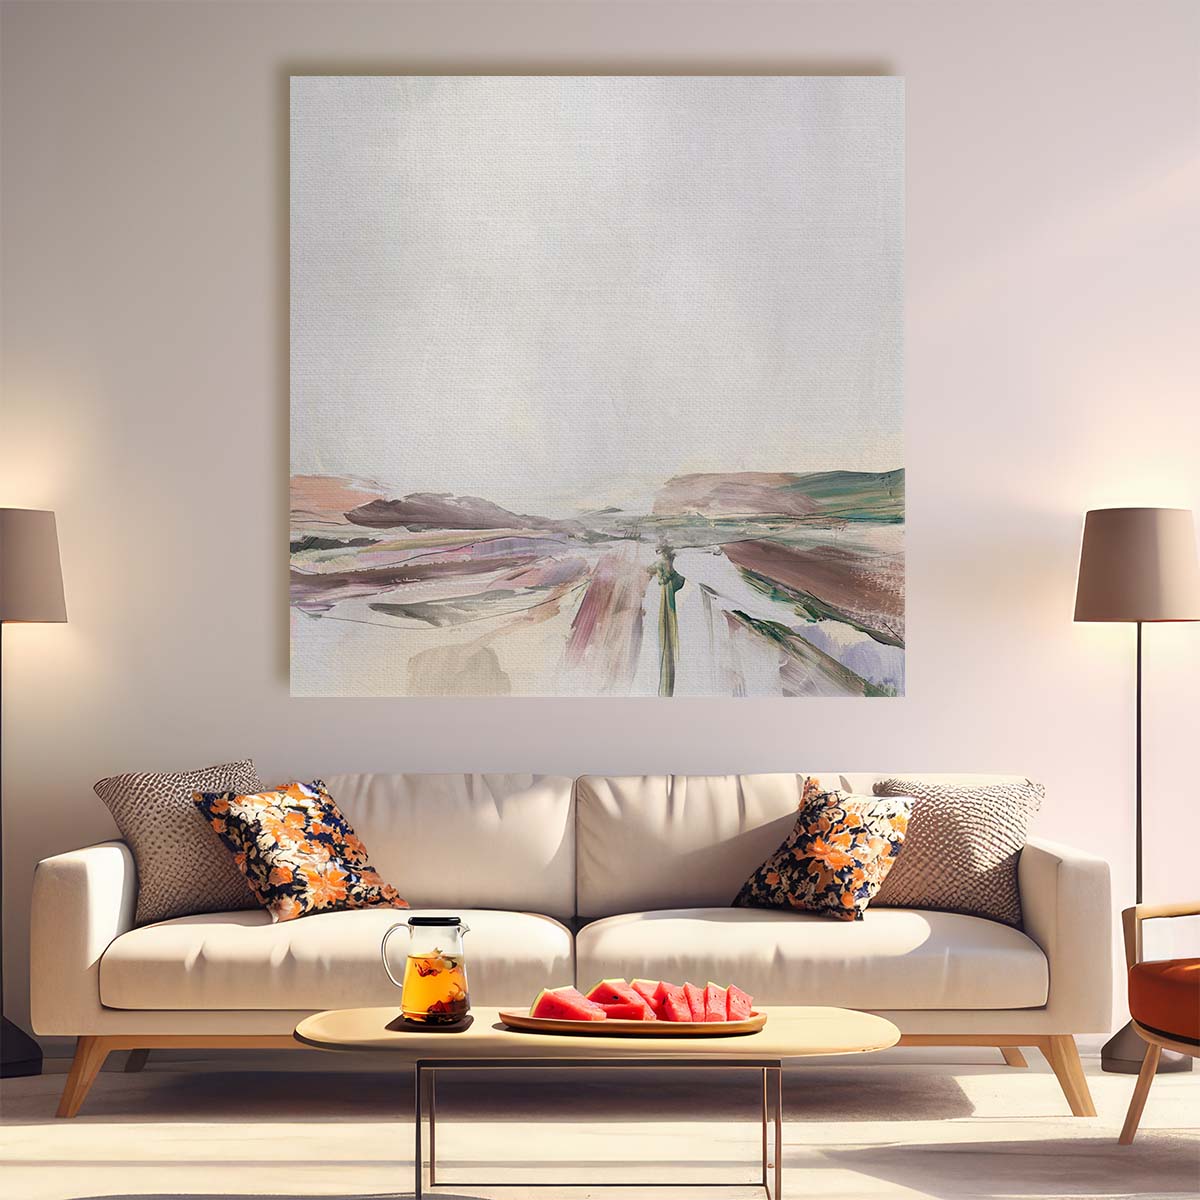 Dan Hobday Contemporary Minimalist Abstract Landscape Illustration Wall Art by Luxuriance Designs. Made in USA.